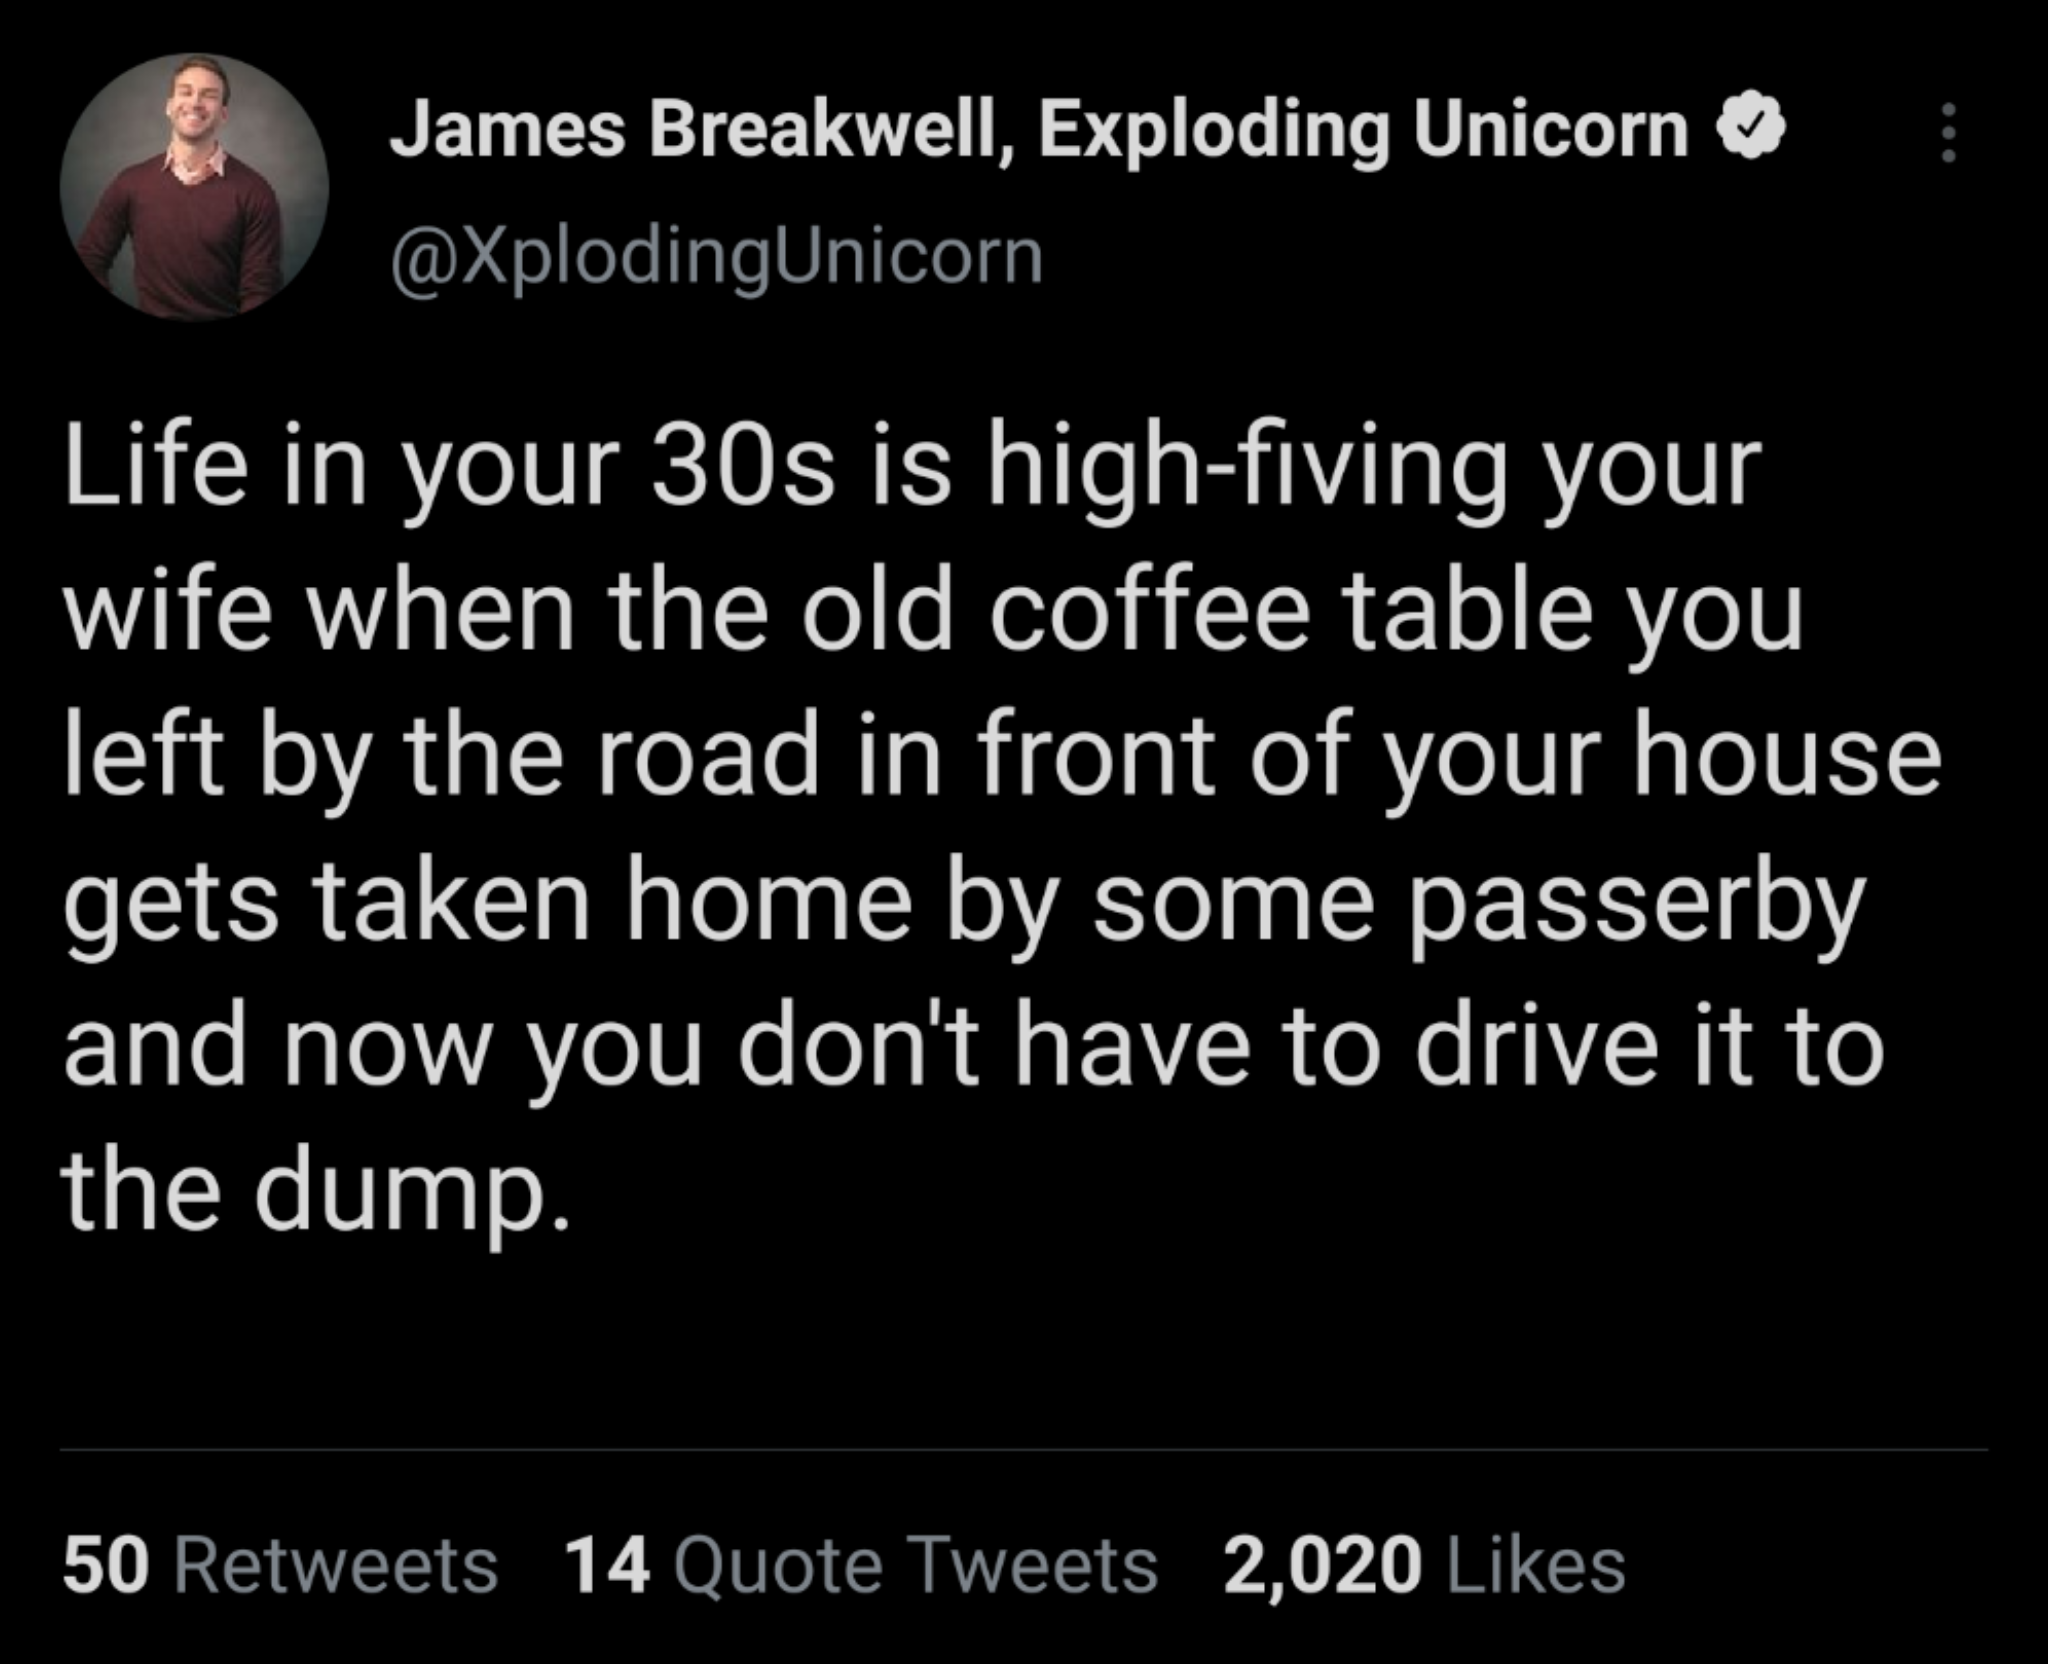 atmosphere - James Breakwell, Exploding Unicorn Life in your 30s is highfiving your wife when the old coffee table you left by the road in front of your house gets taken home by some passerby and now you don't have to drive it to the dump. 50 14 Quote Twe